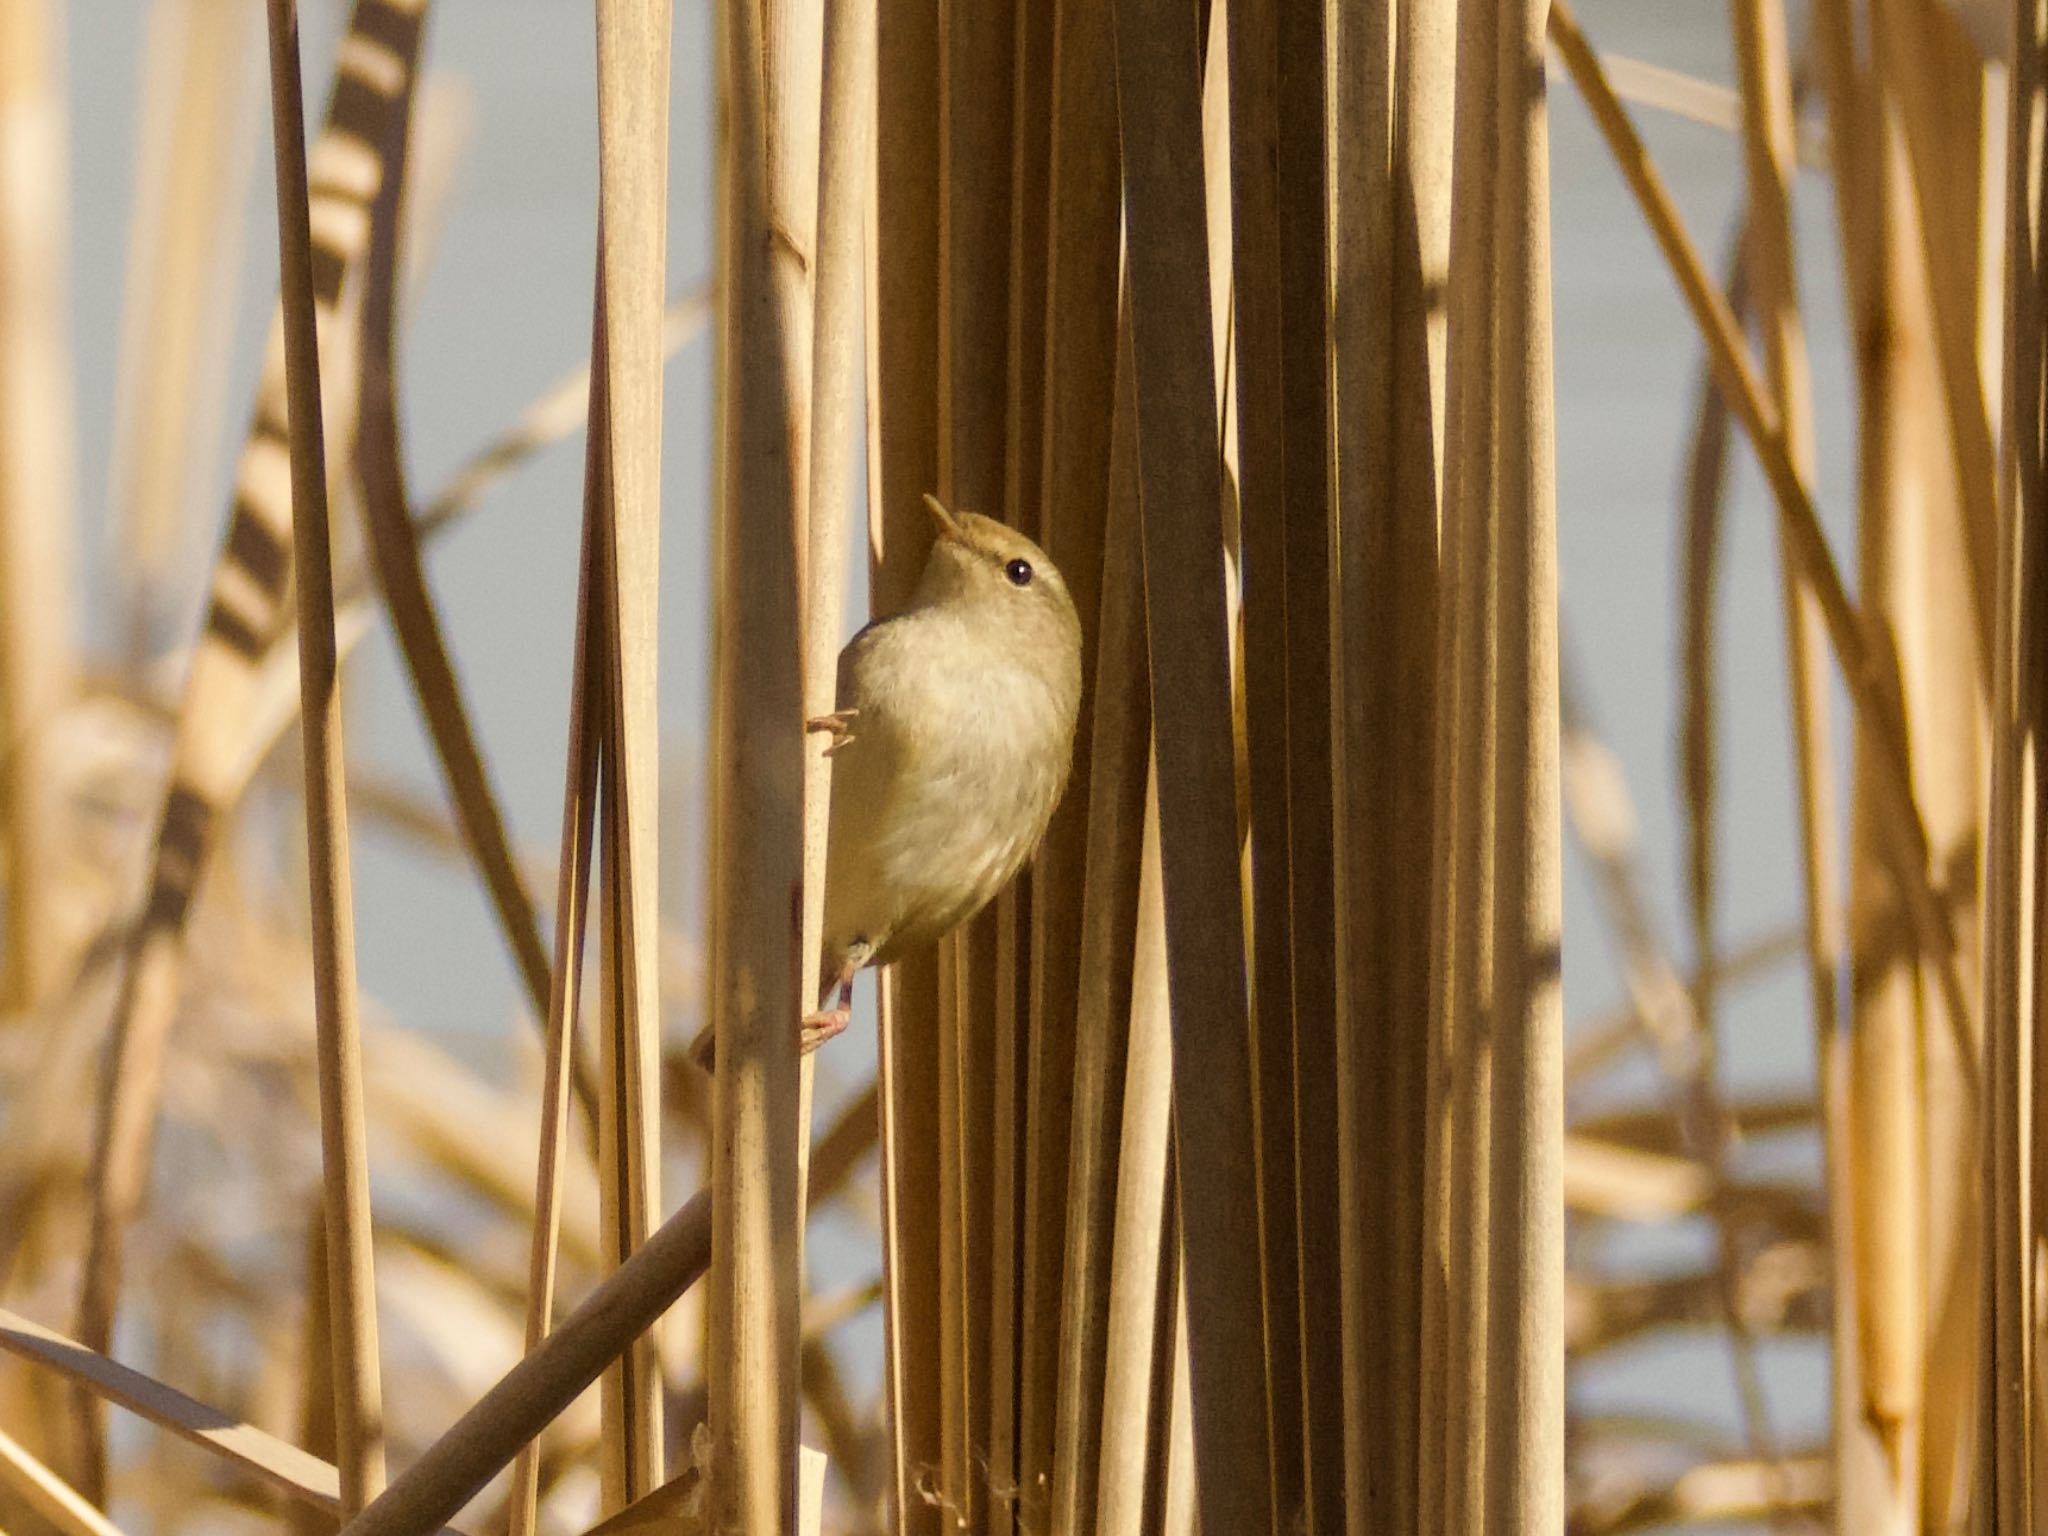 Photo of Japanese Bush Warbler at つくし湖(茨城県桜川市) by スキーヤー